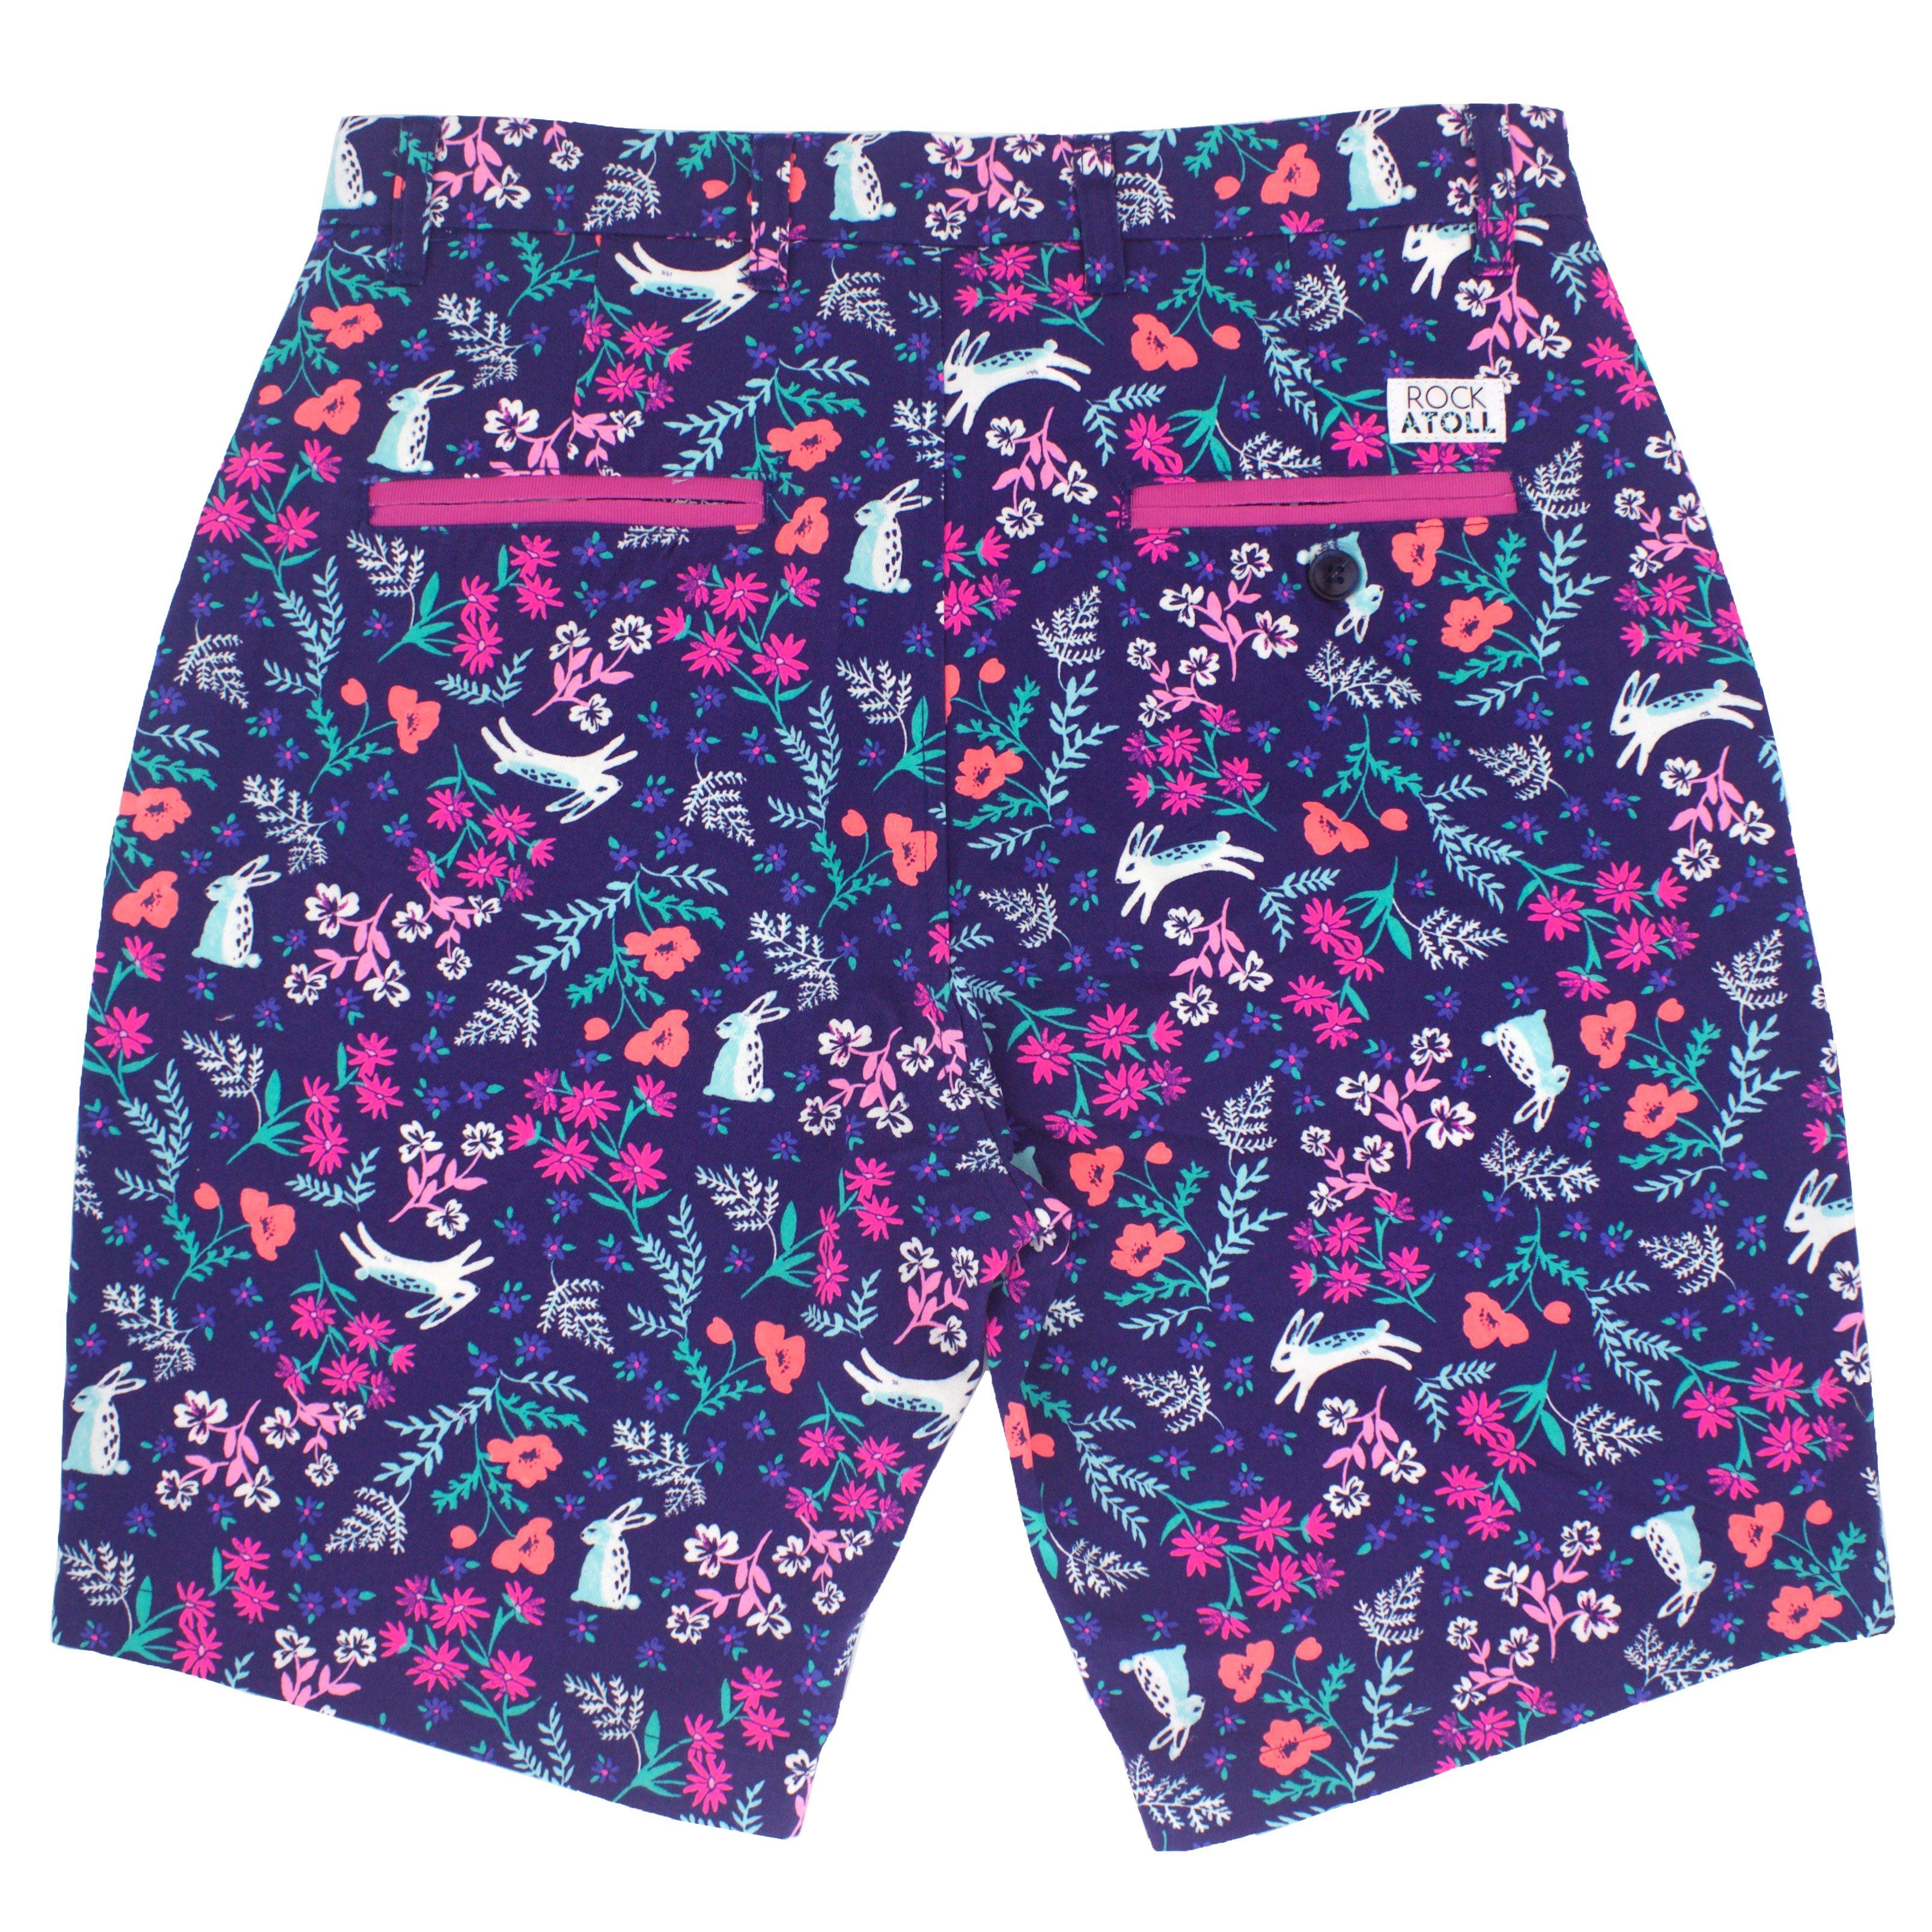 Crazy Bold Bunny Rabbit Shorts for Men in Pink and Purple